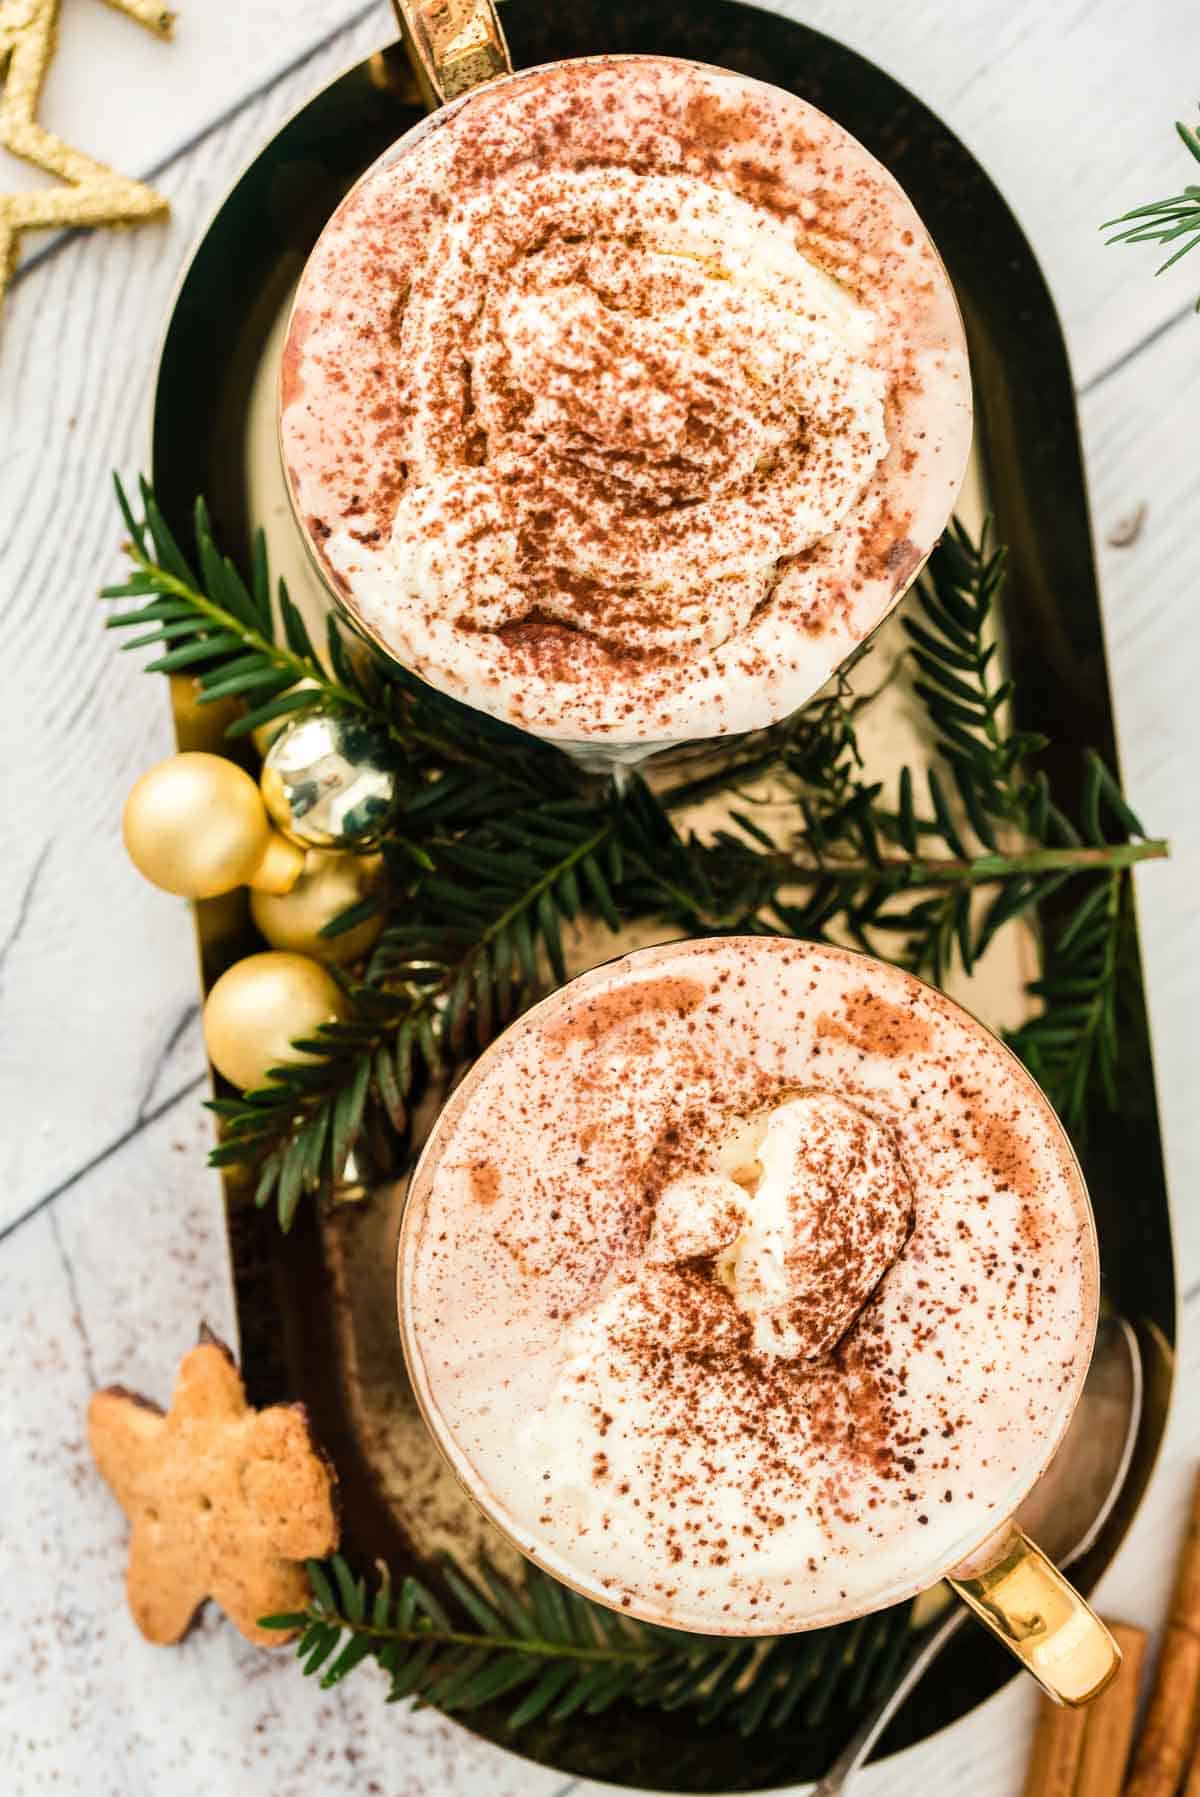 Two mugs of hot chocolate on a decorative tray.